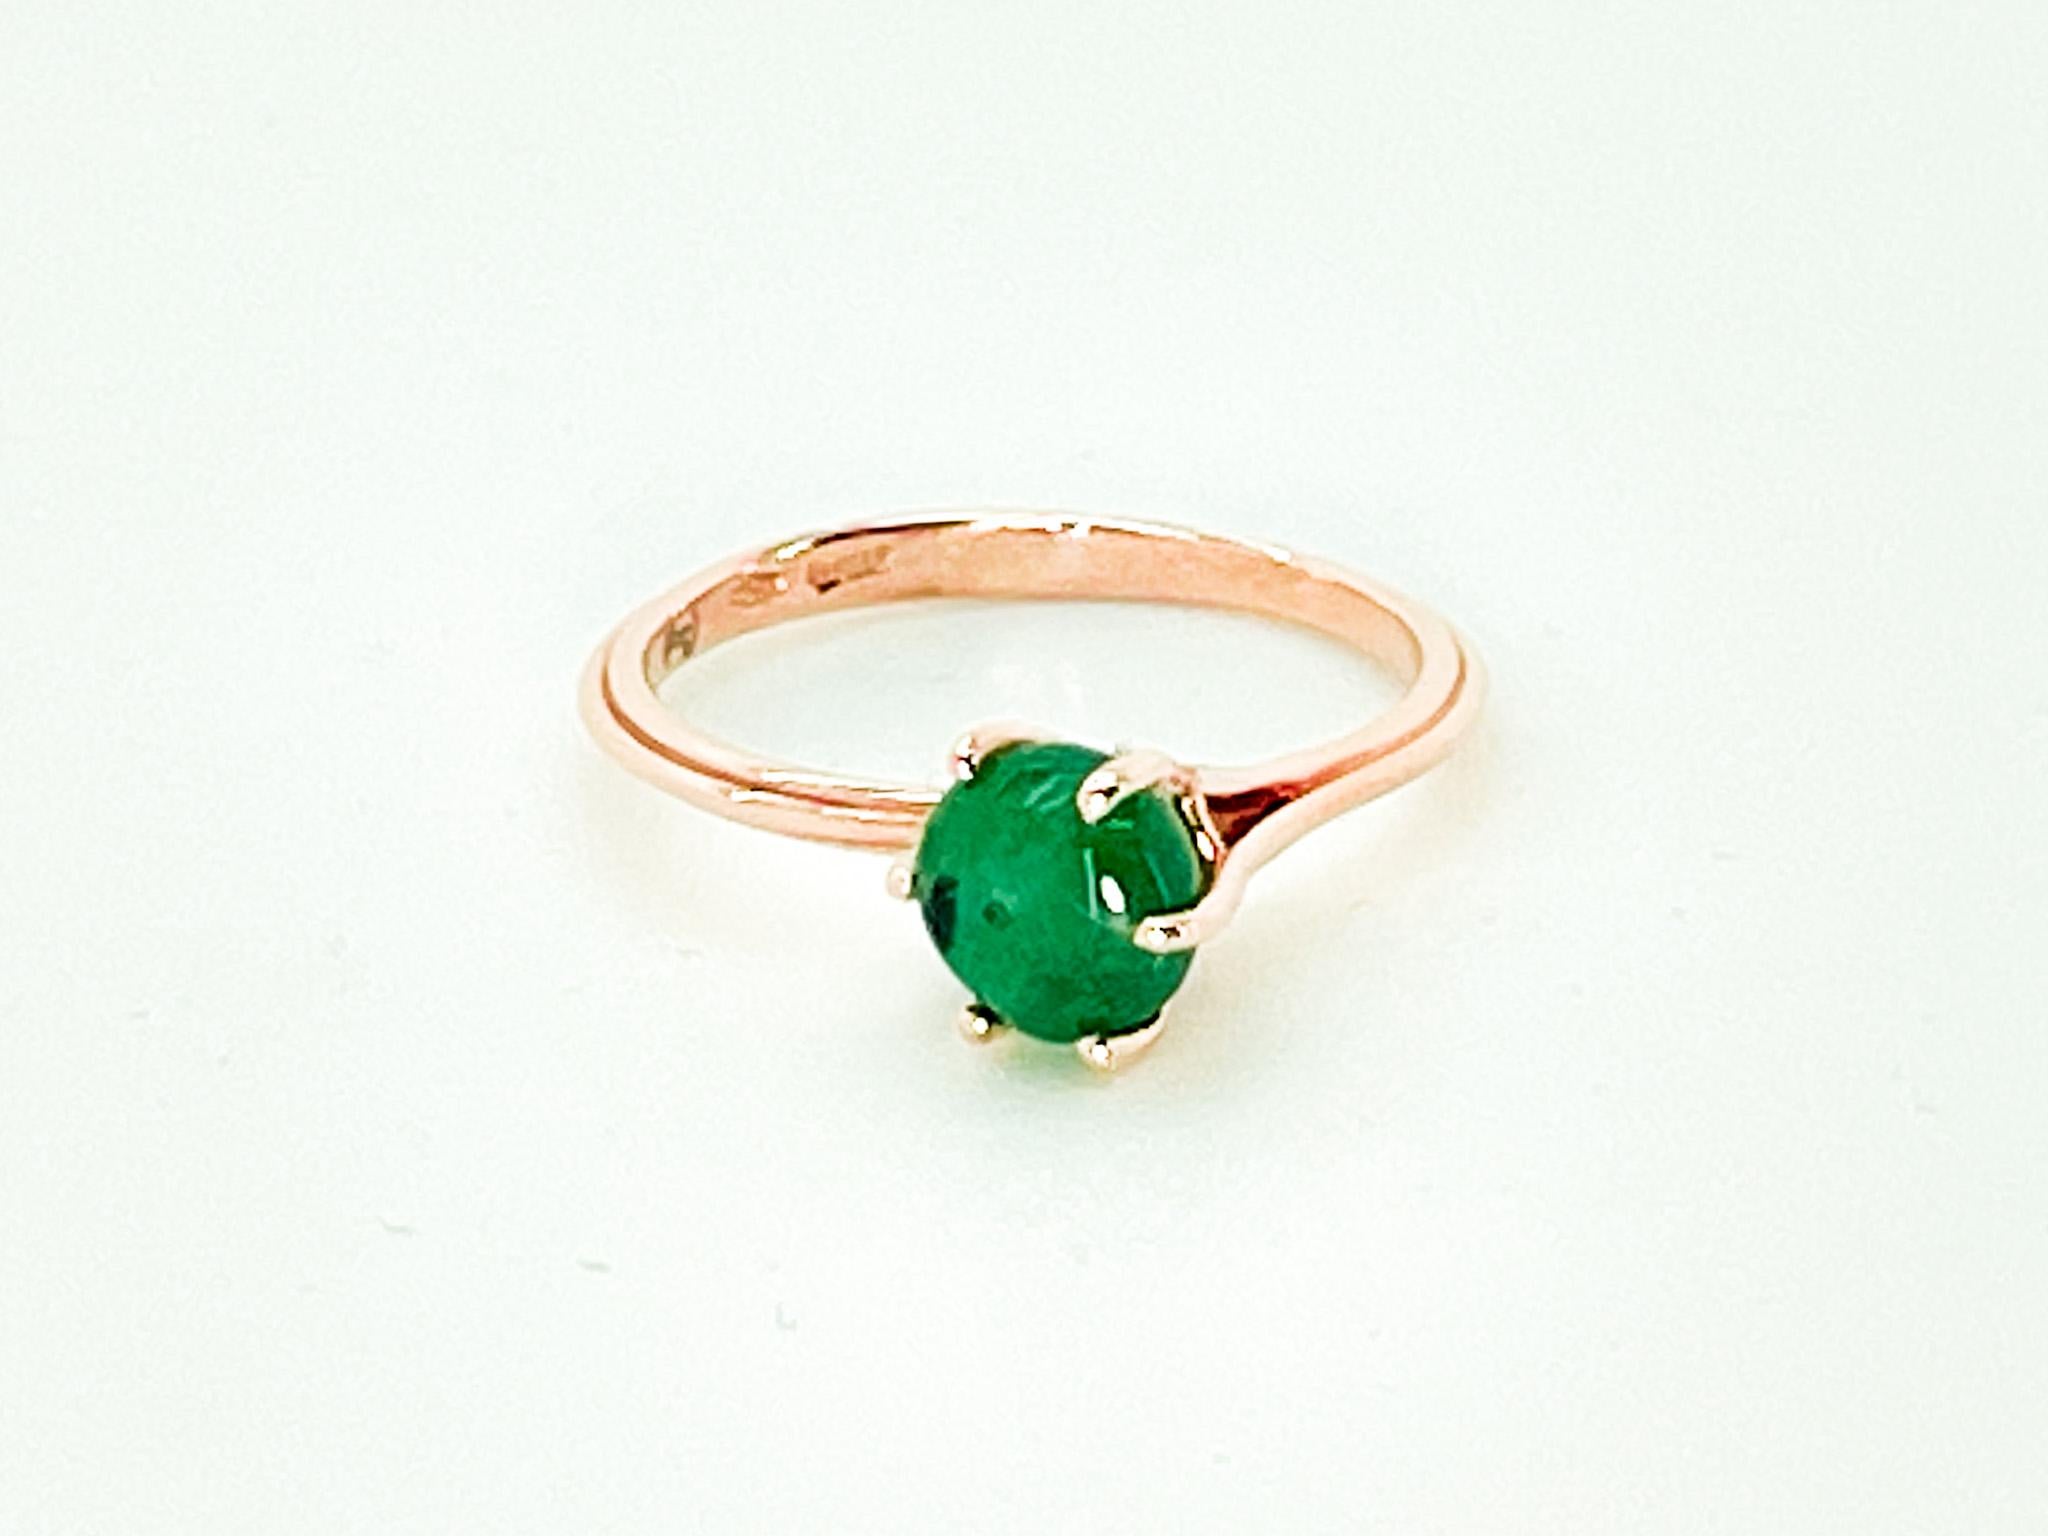 Cabochon 1.4 cts Emerald 18K Rose Gold  Asymmetric Cosmic Design Stackable  Cocktail Ring For Sale